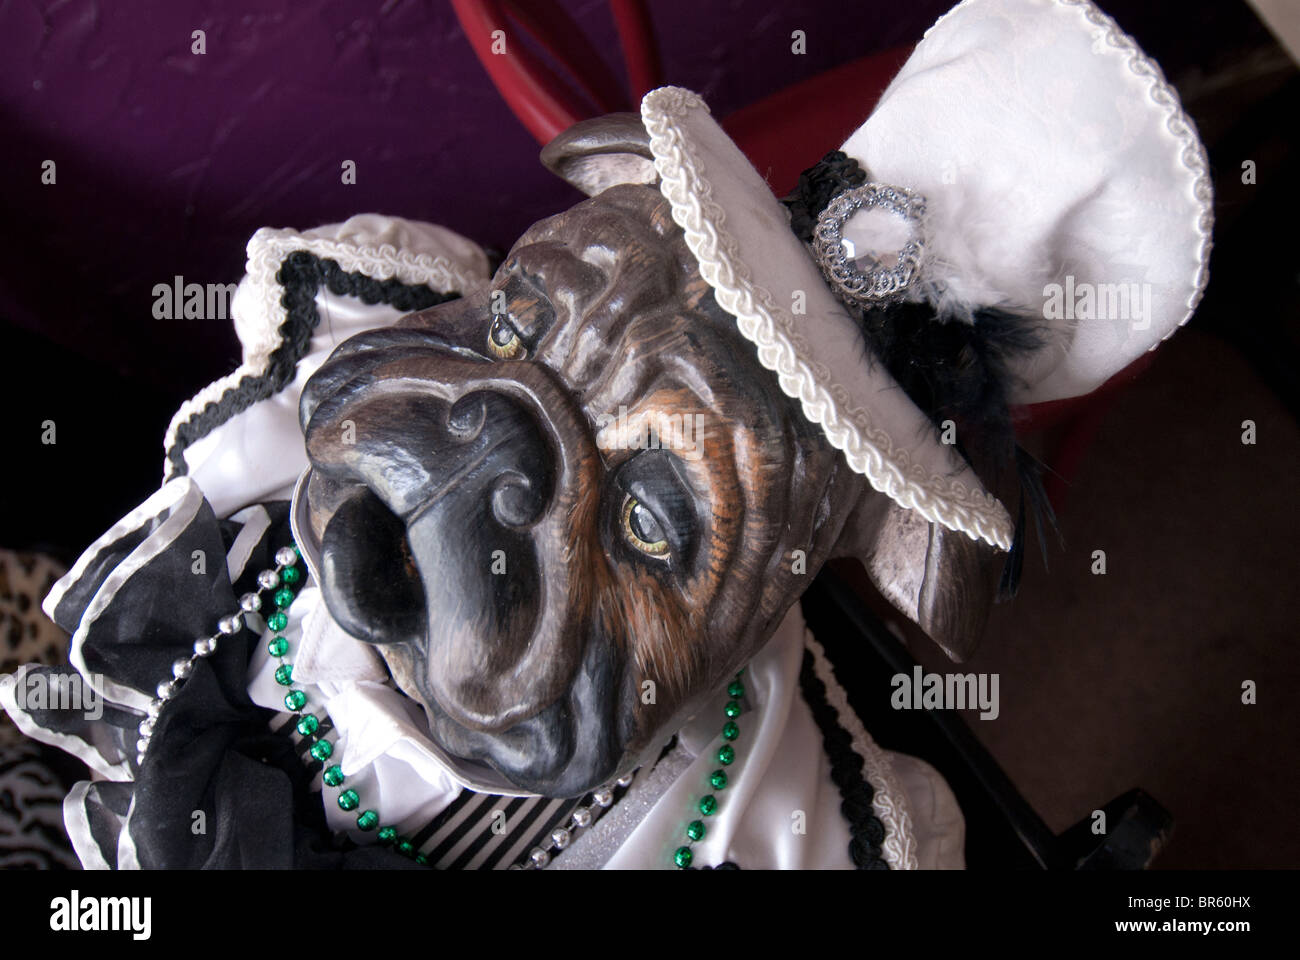 Life-size bulldog figure in 'Downtowner's on Dauphin' Cafe in Mobile, Alabama, USA Stock Photo